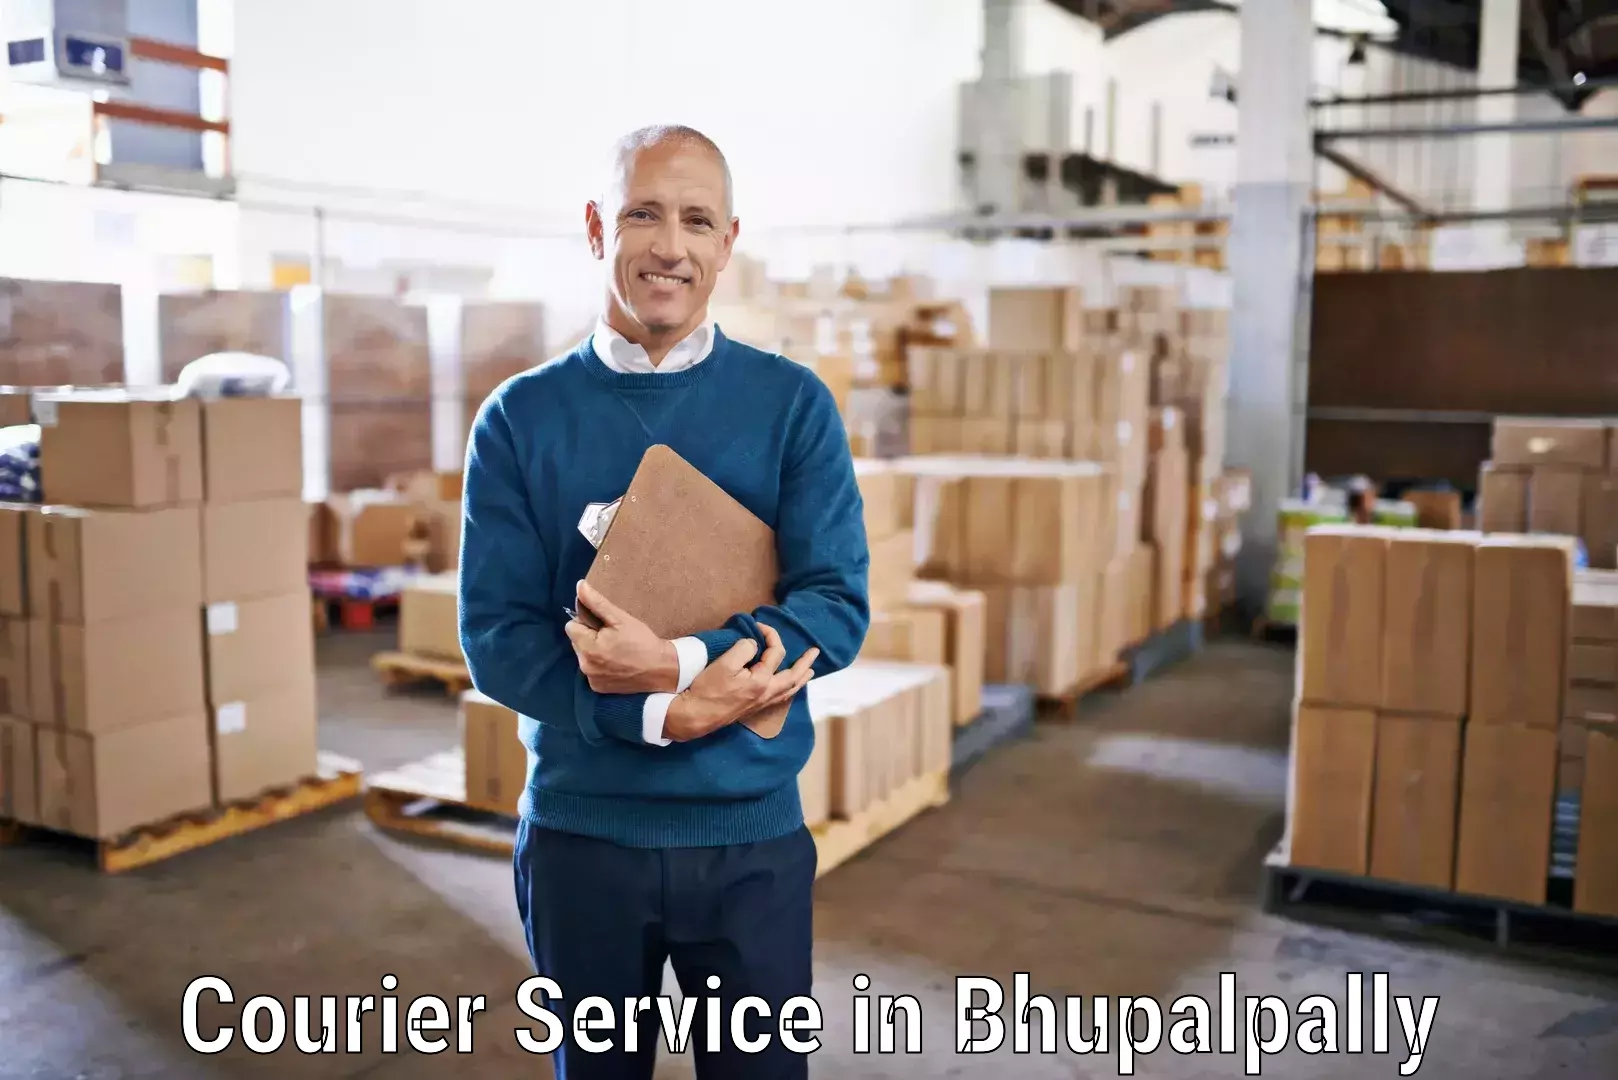 Tailored freight services in Bhupalpally